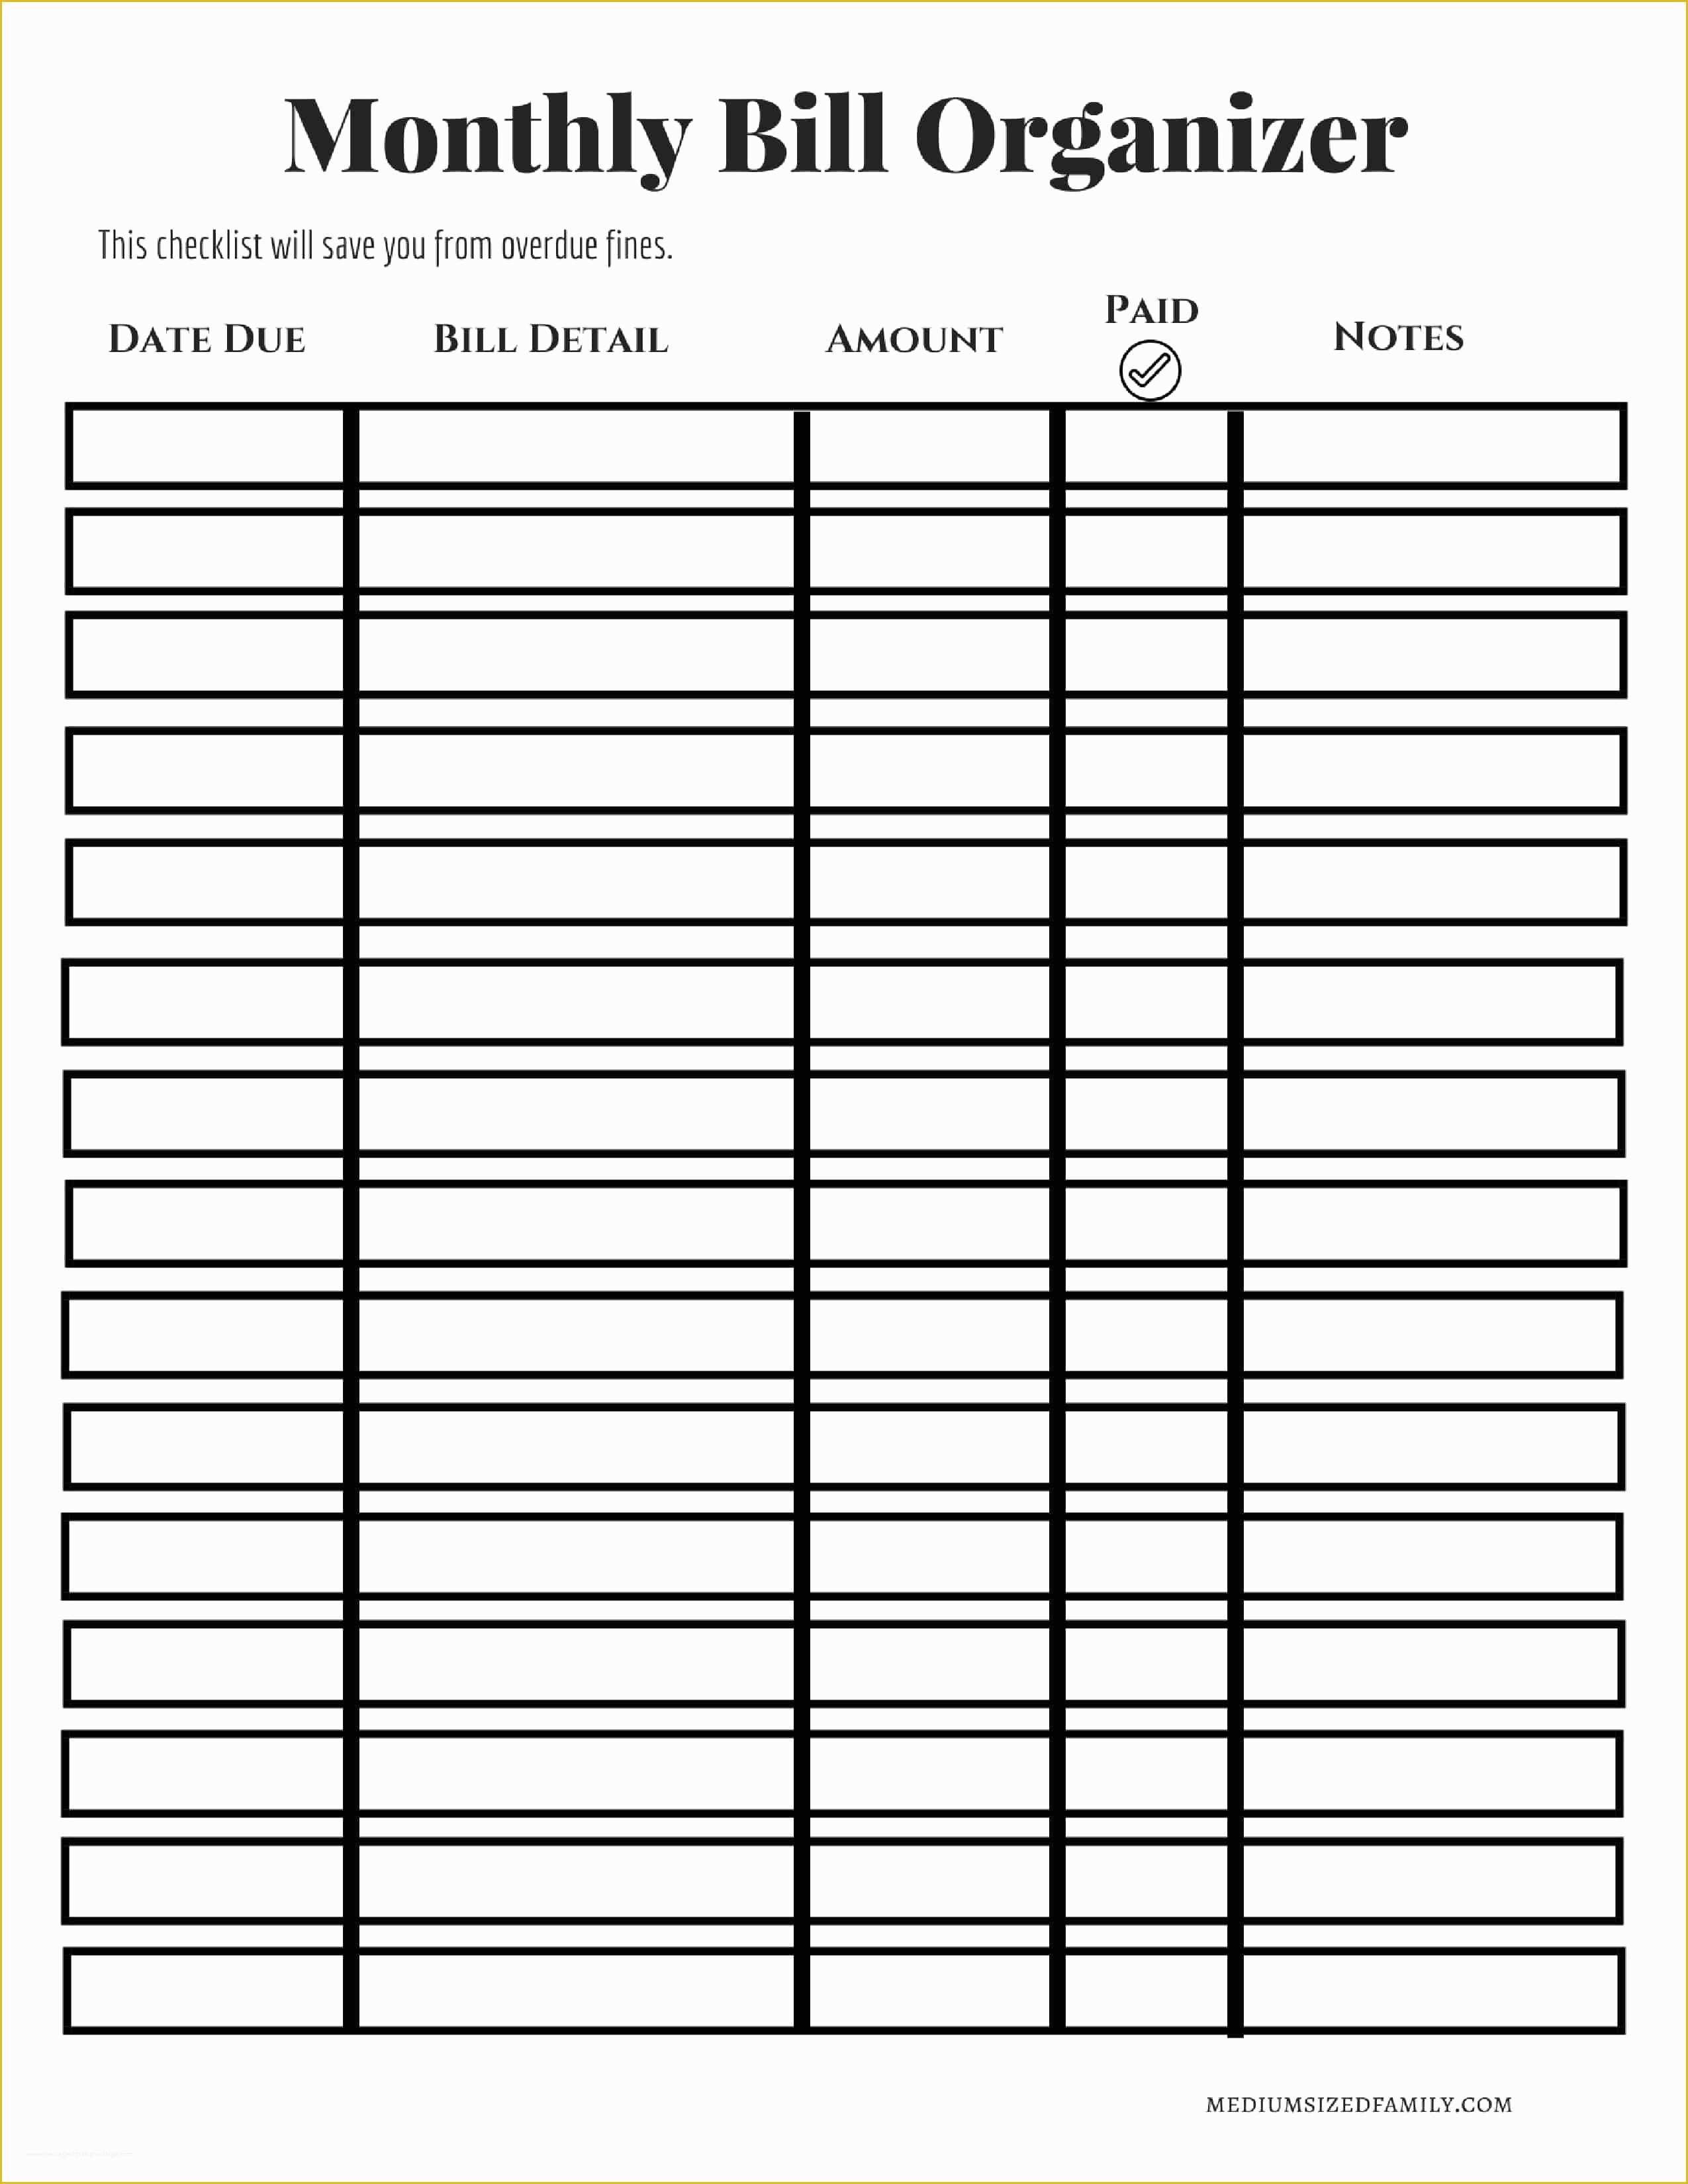 bill-tracker-template-free-of-the-free-monthly-bill-organizer-that-will